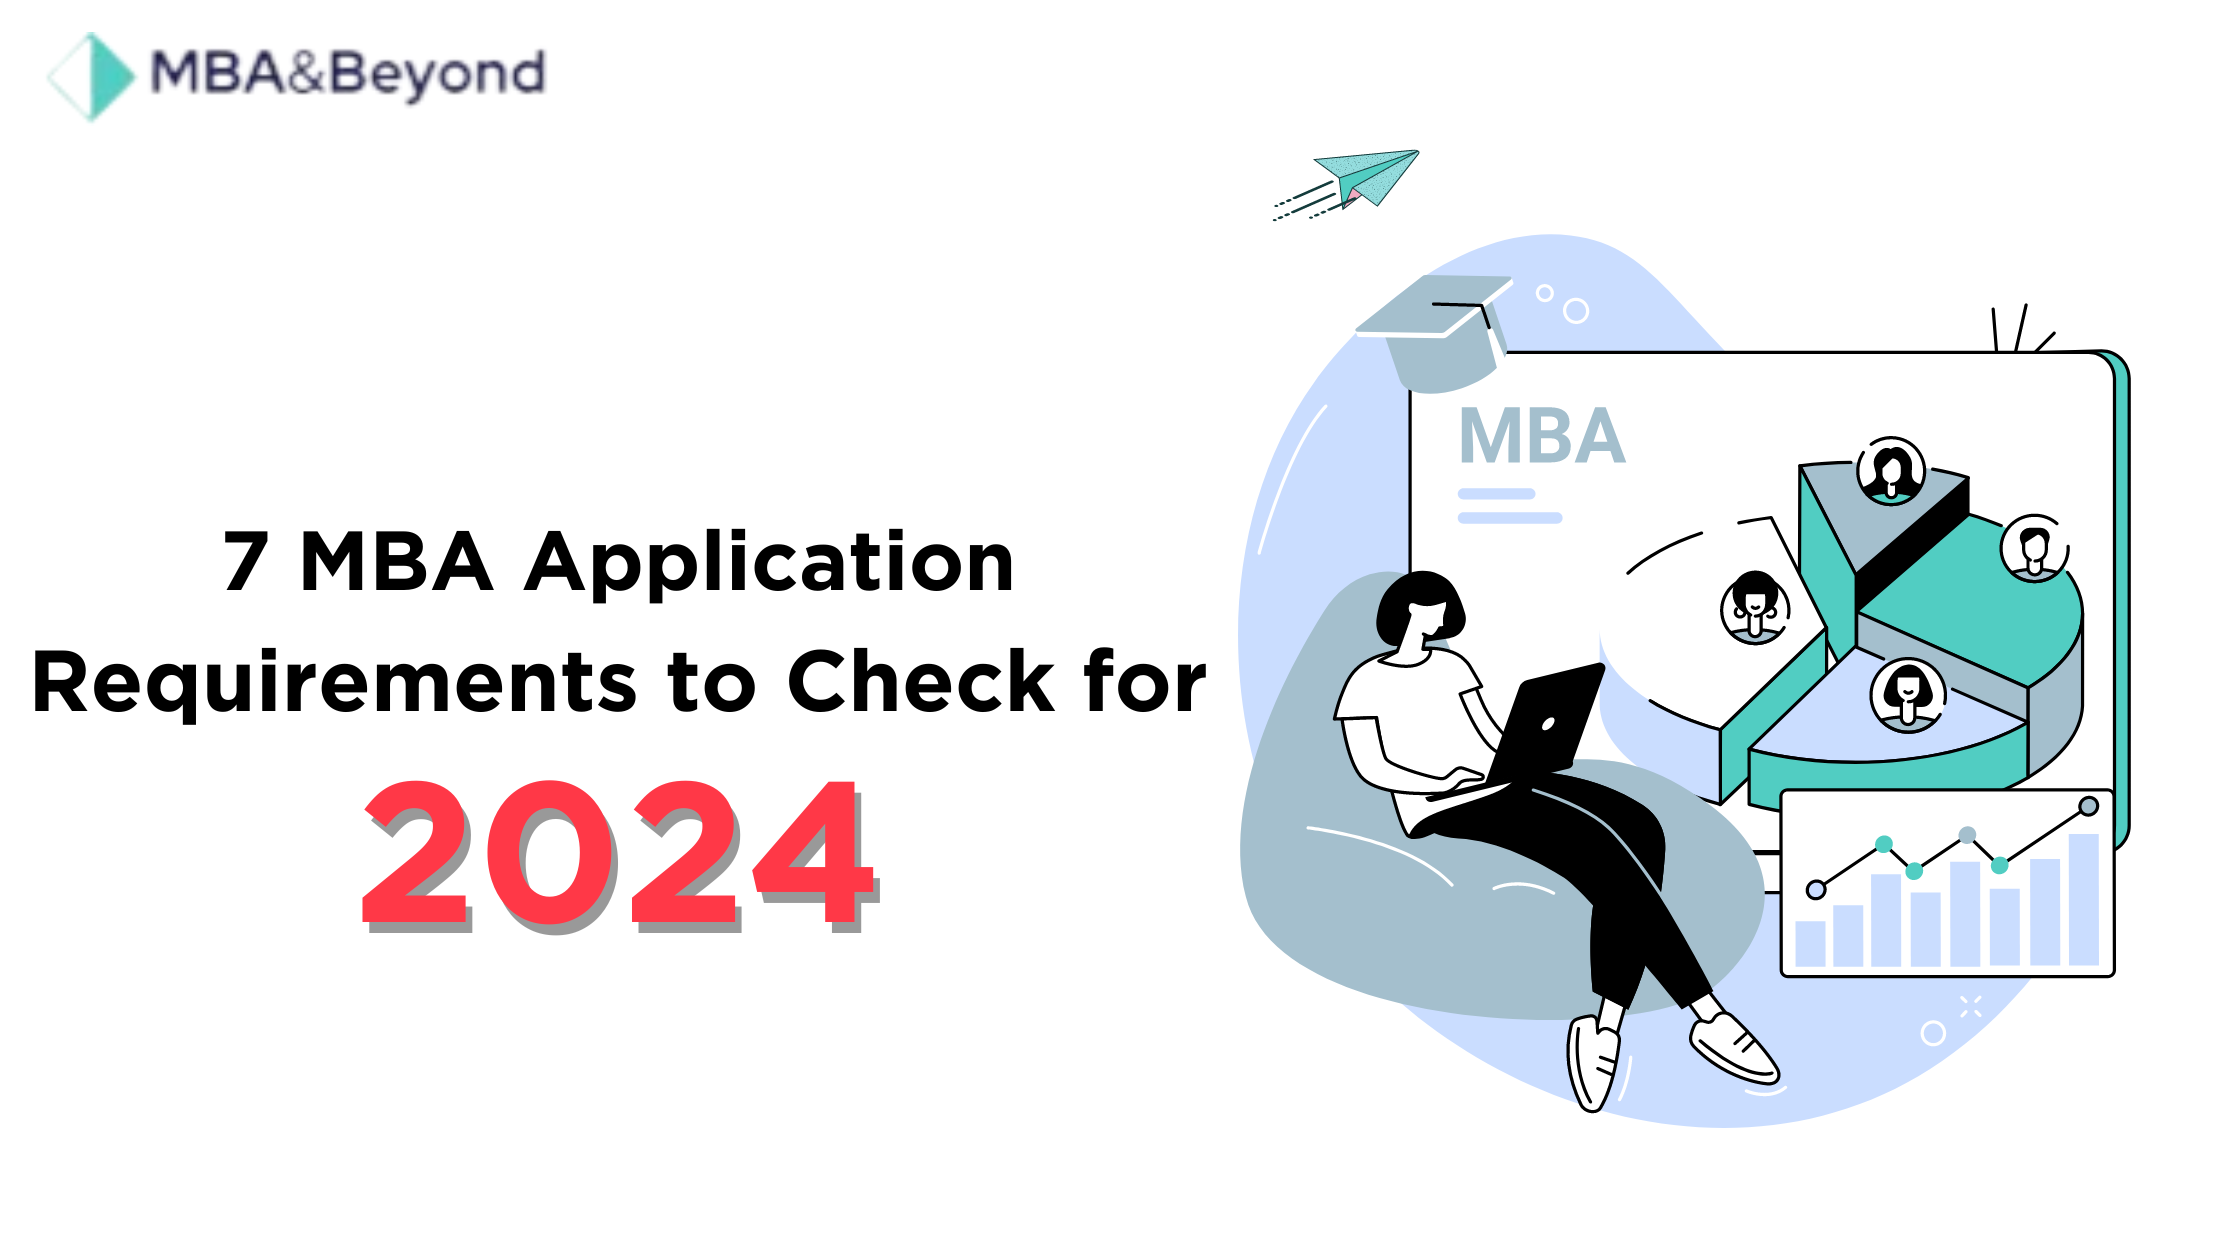 MBA Application Checklist 2024: 7 Requirements You need to check